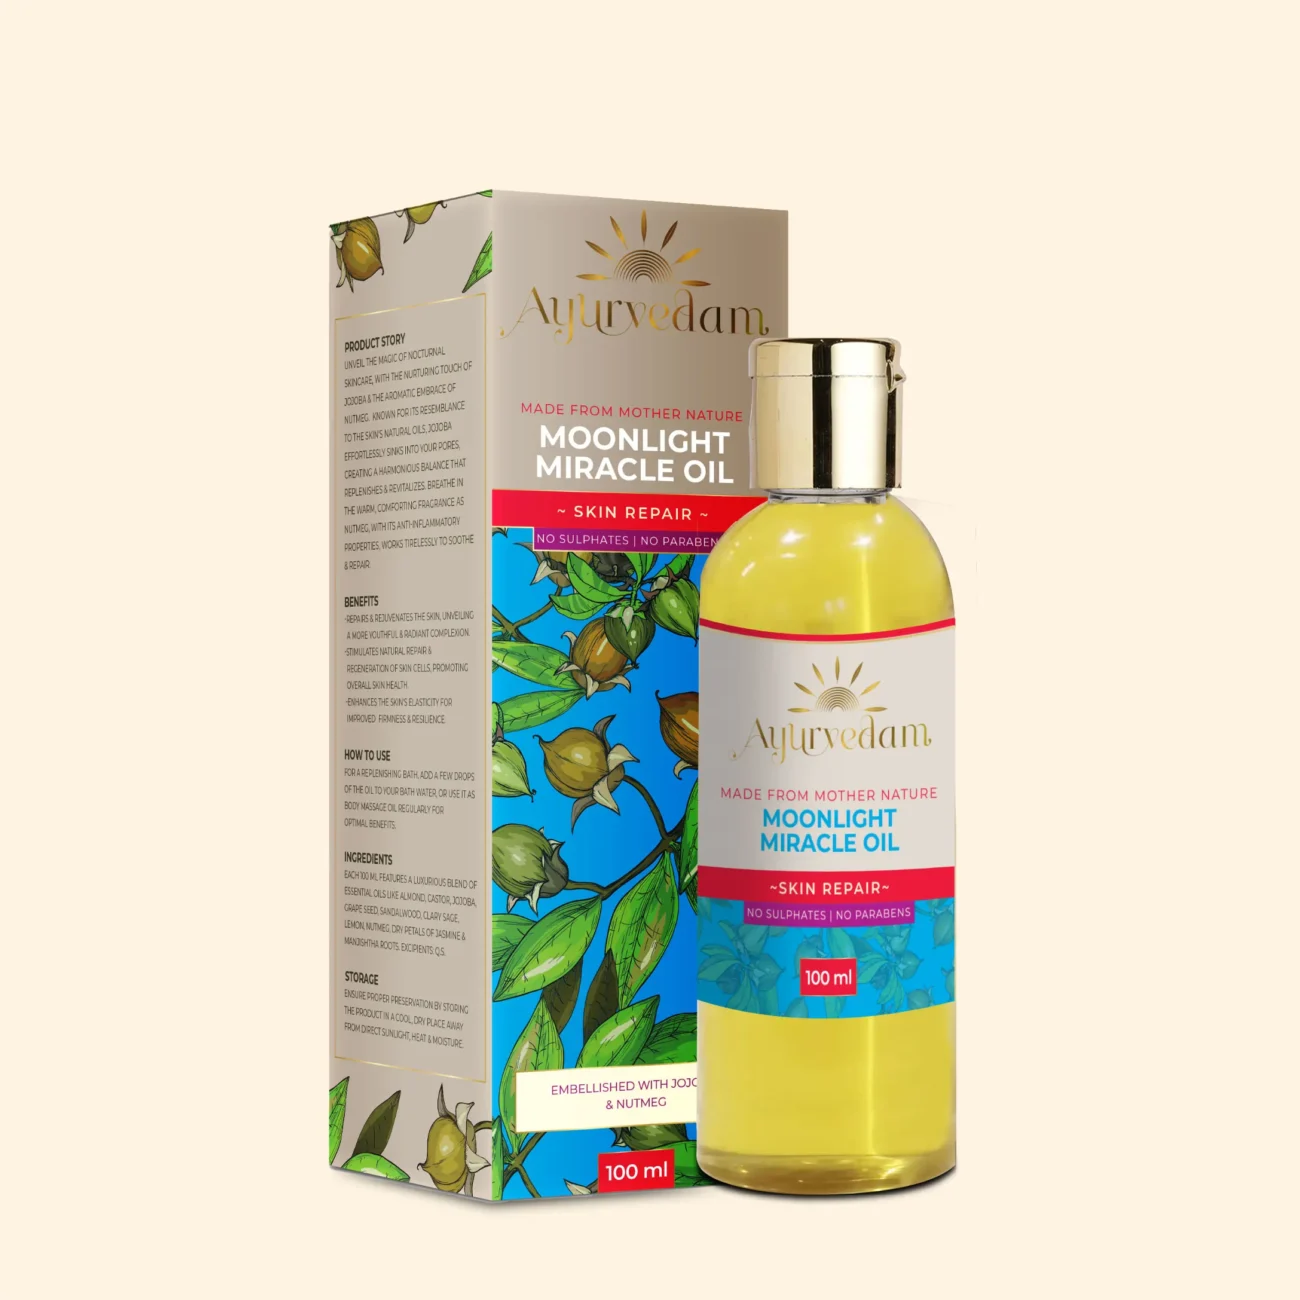 Moonlight Miracle Oil, an ayurvedic body massage oil along with its package by Ayurvedam